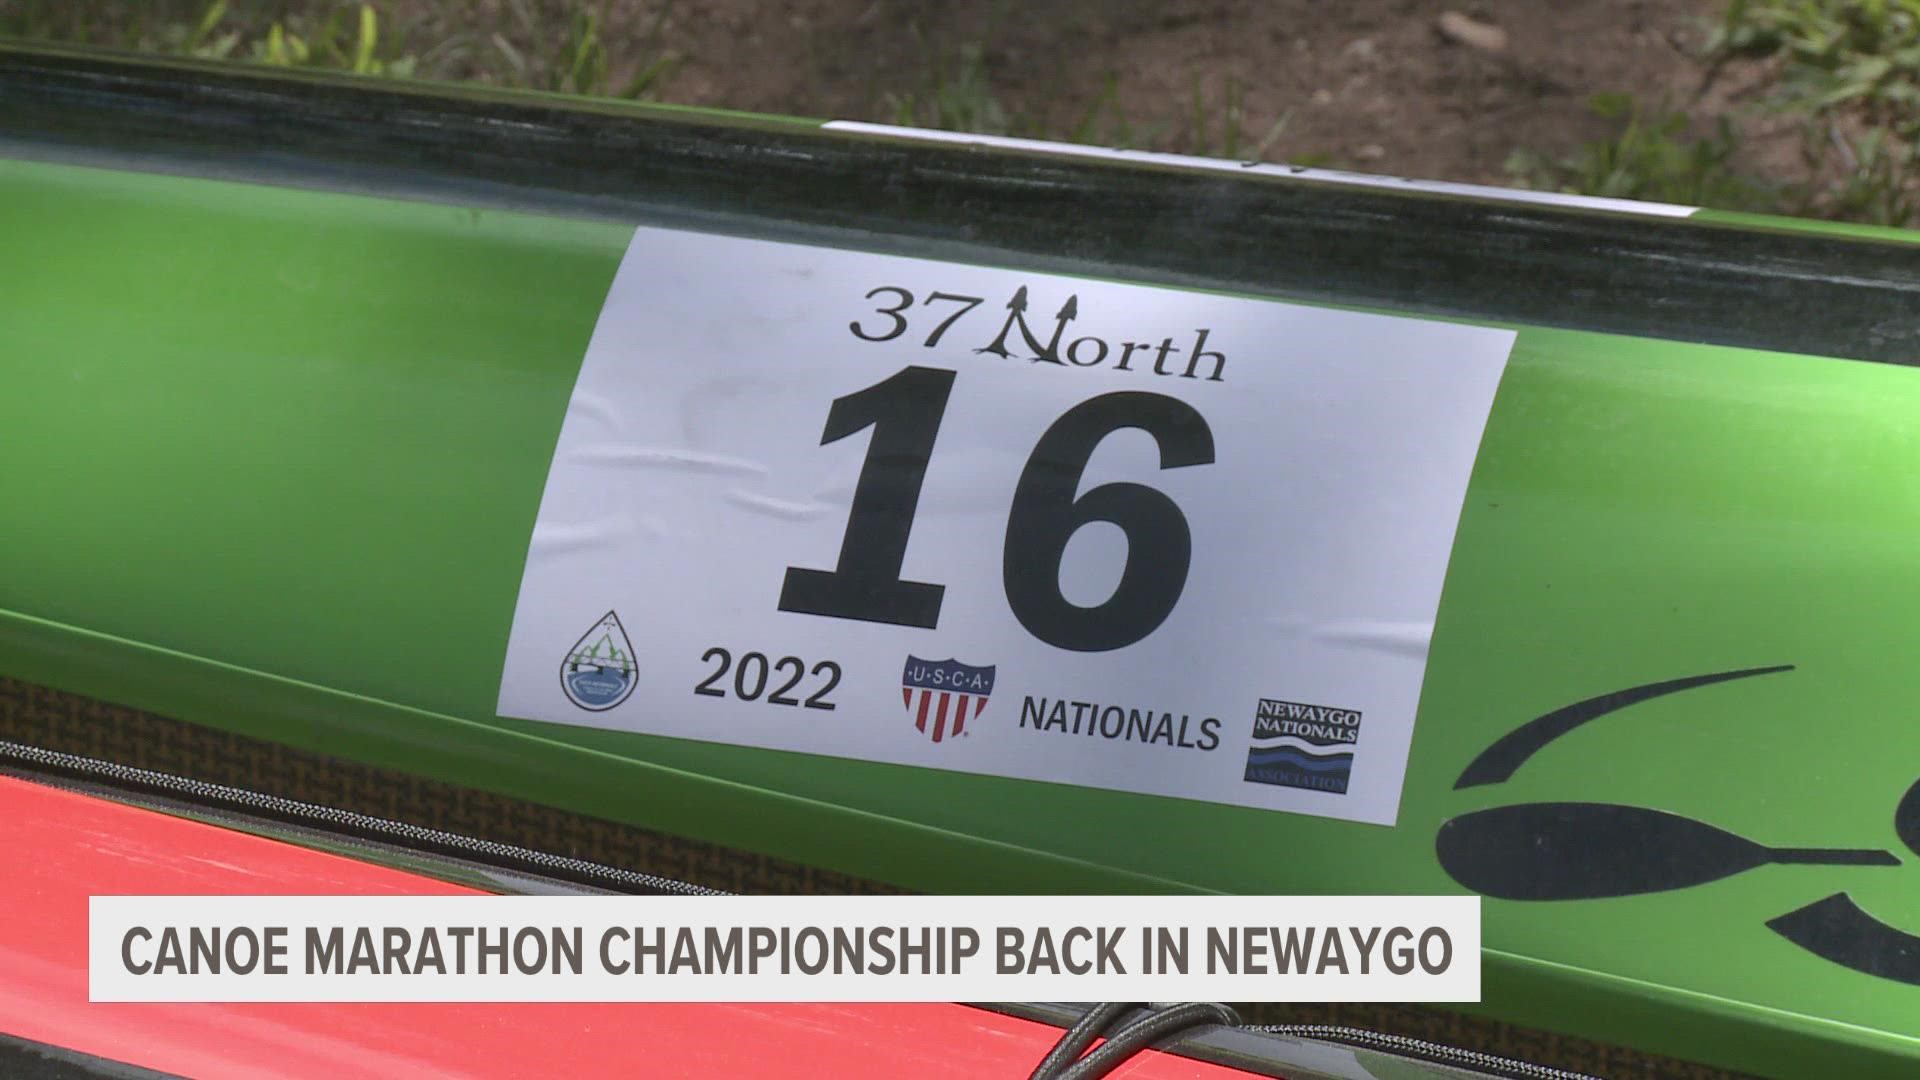 It's the third time Newaygo has hosted the US Canoe Marathon Nationals. Past events have paved the way for better lake access and safety measures along the waterway.